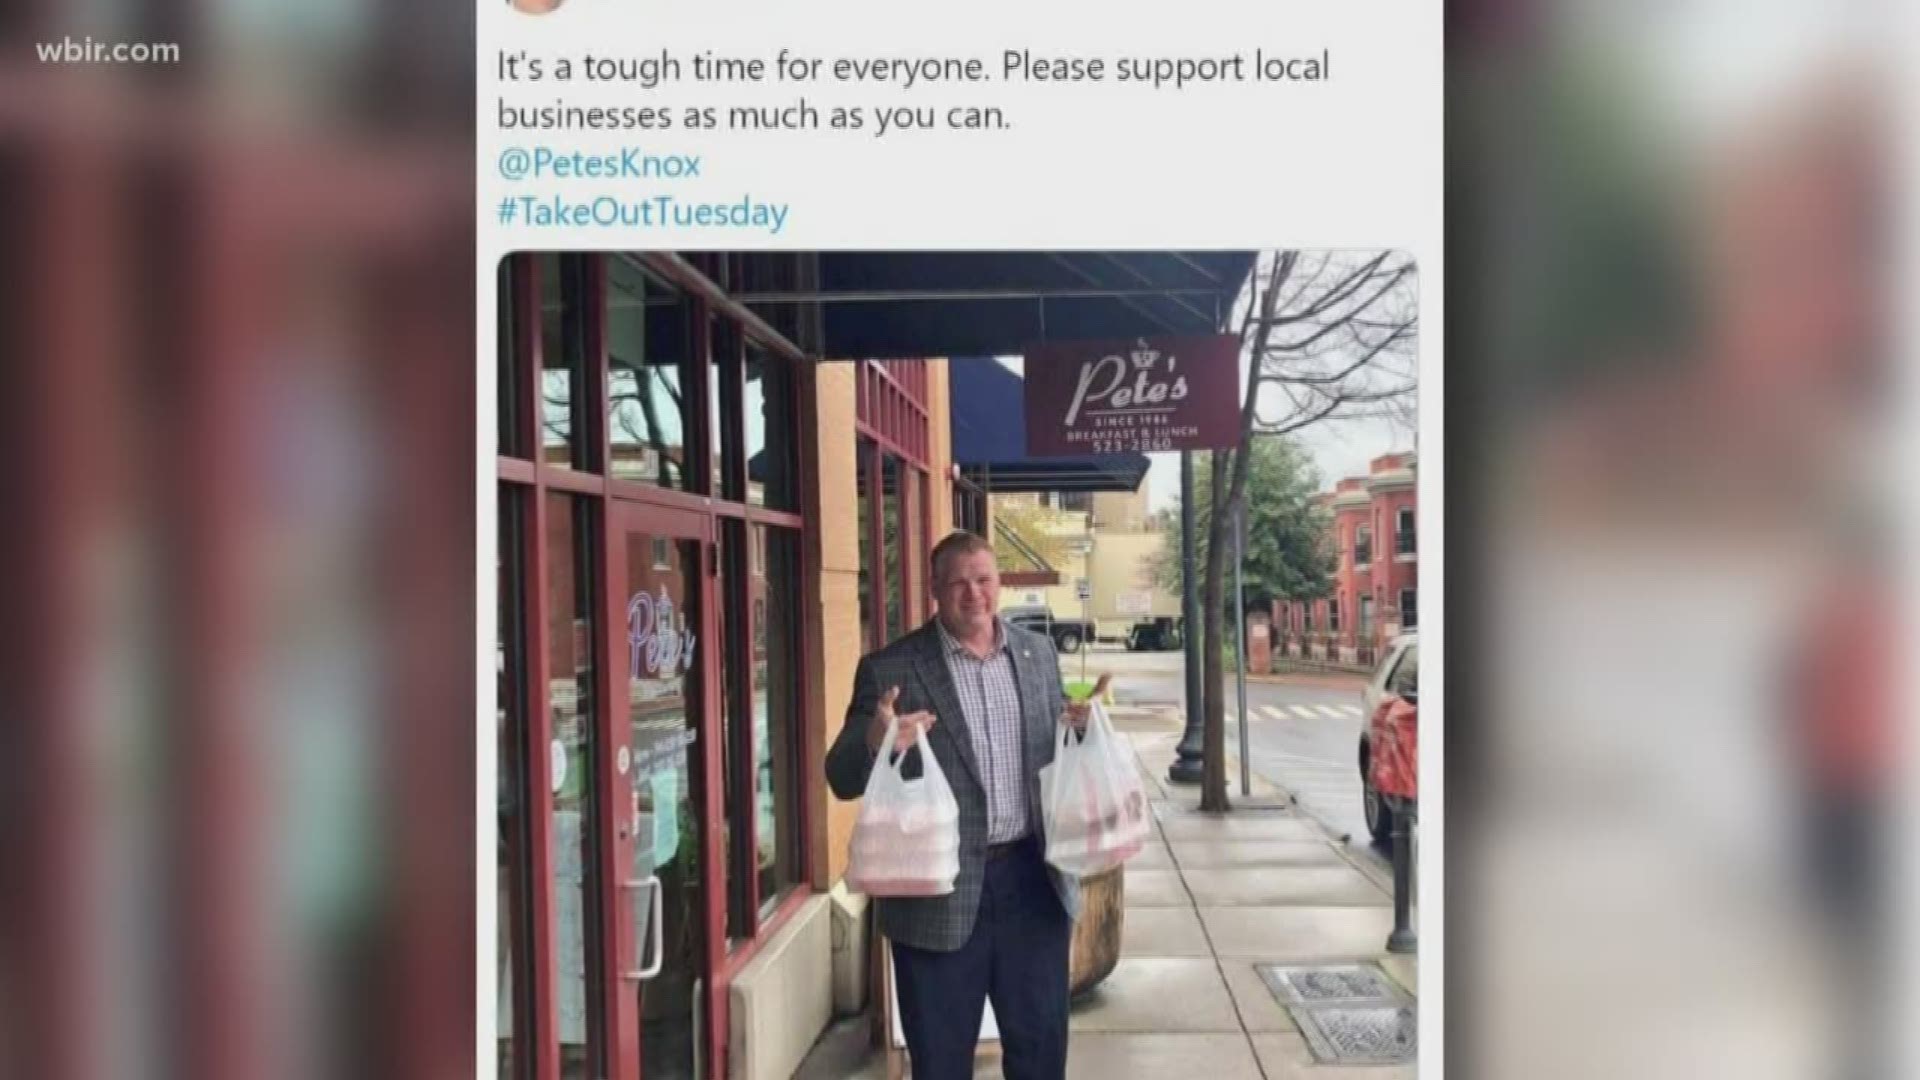 The mayor is encouraging people to dine local every Tuesday and Thursday and use #TakeOutTuesday or #TakeOutThursday to show your support on social media.